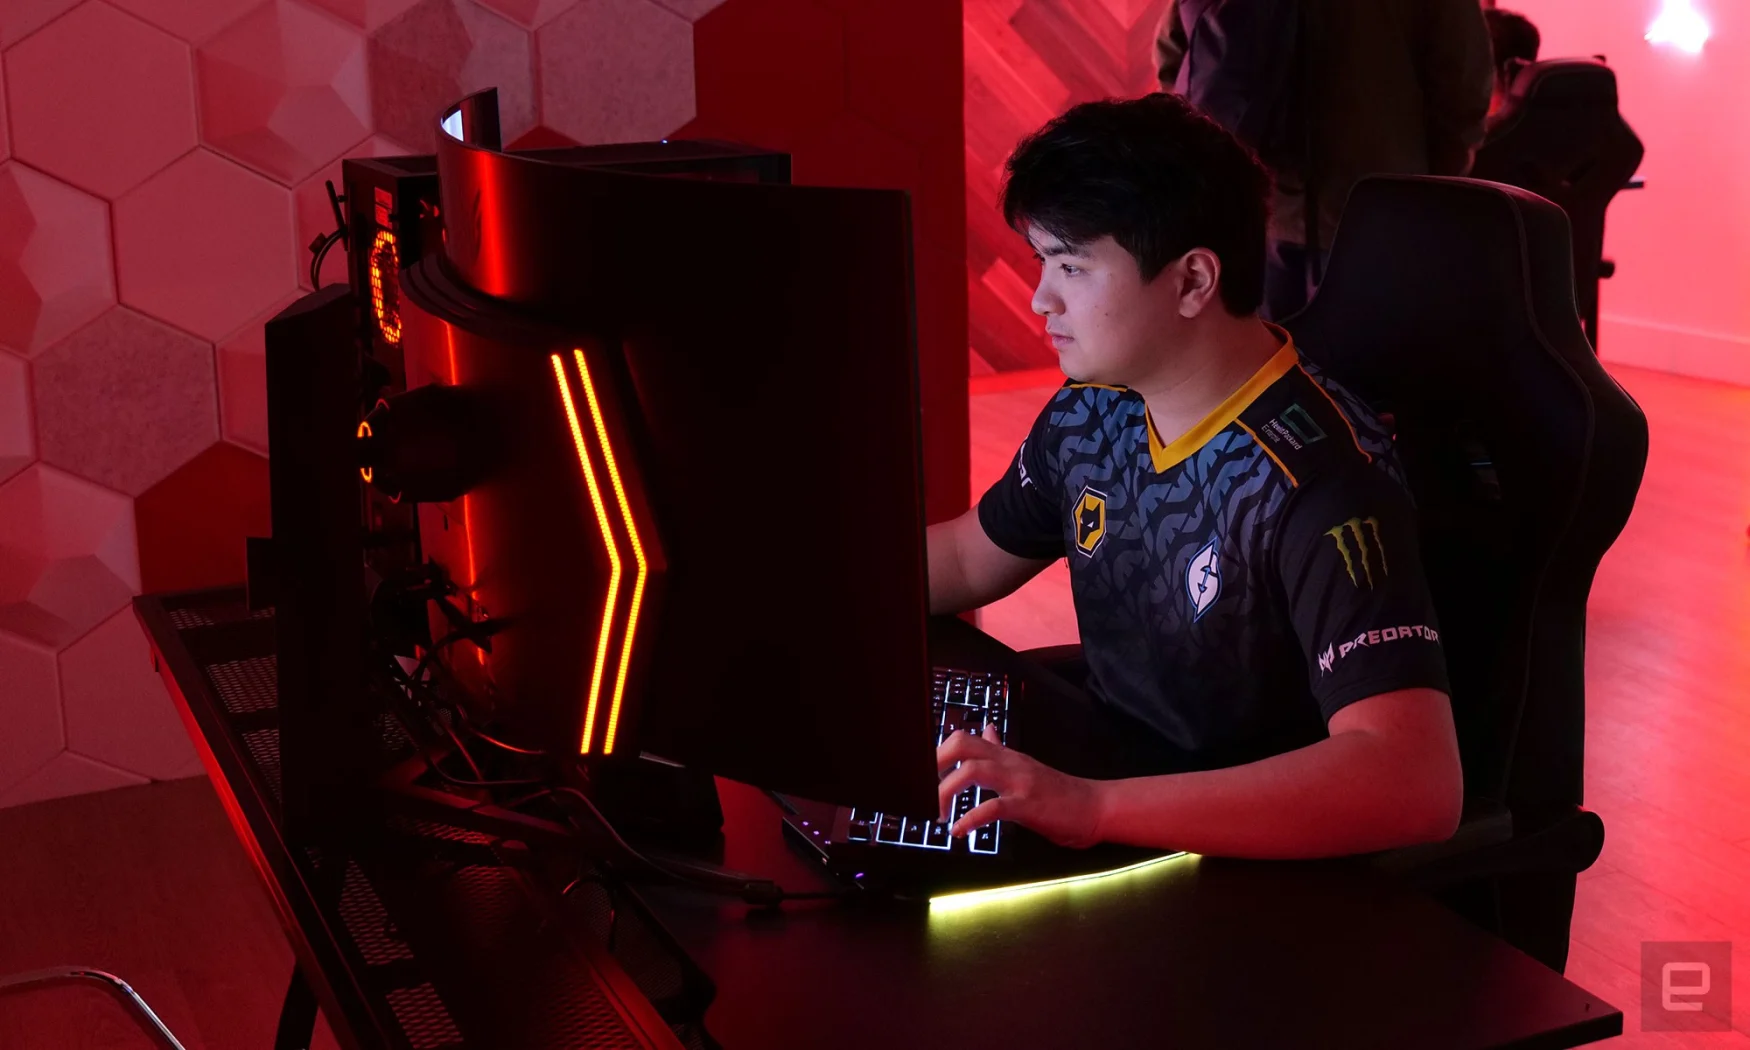 To test its new UltraGear gaming monitors, LG flew in pro Valorant players Com (pictured here) and Jawgemo from Evil Geniuses.